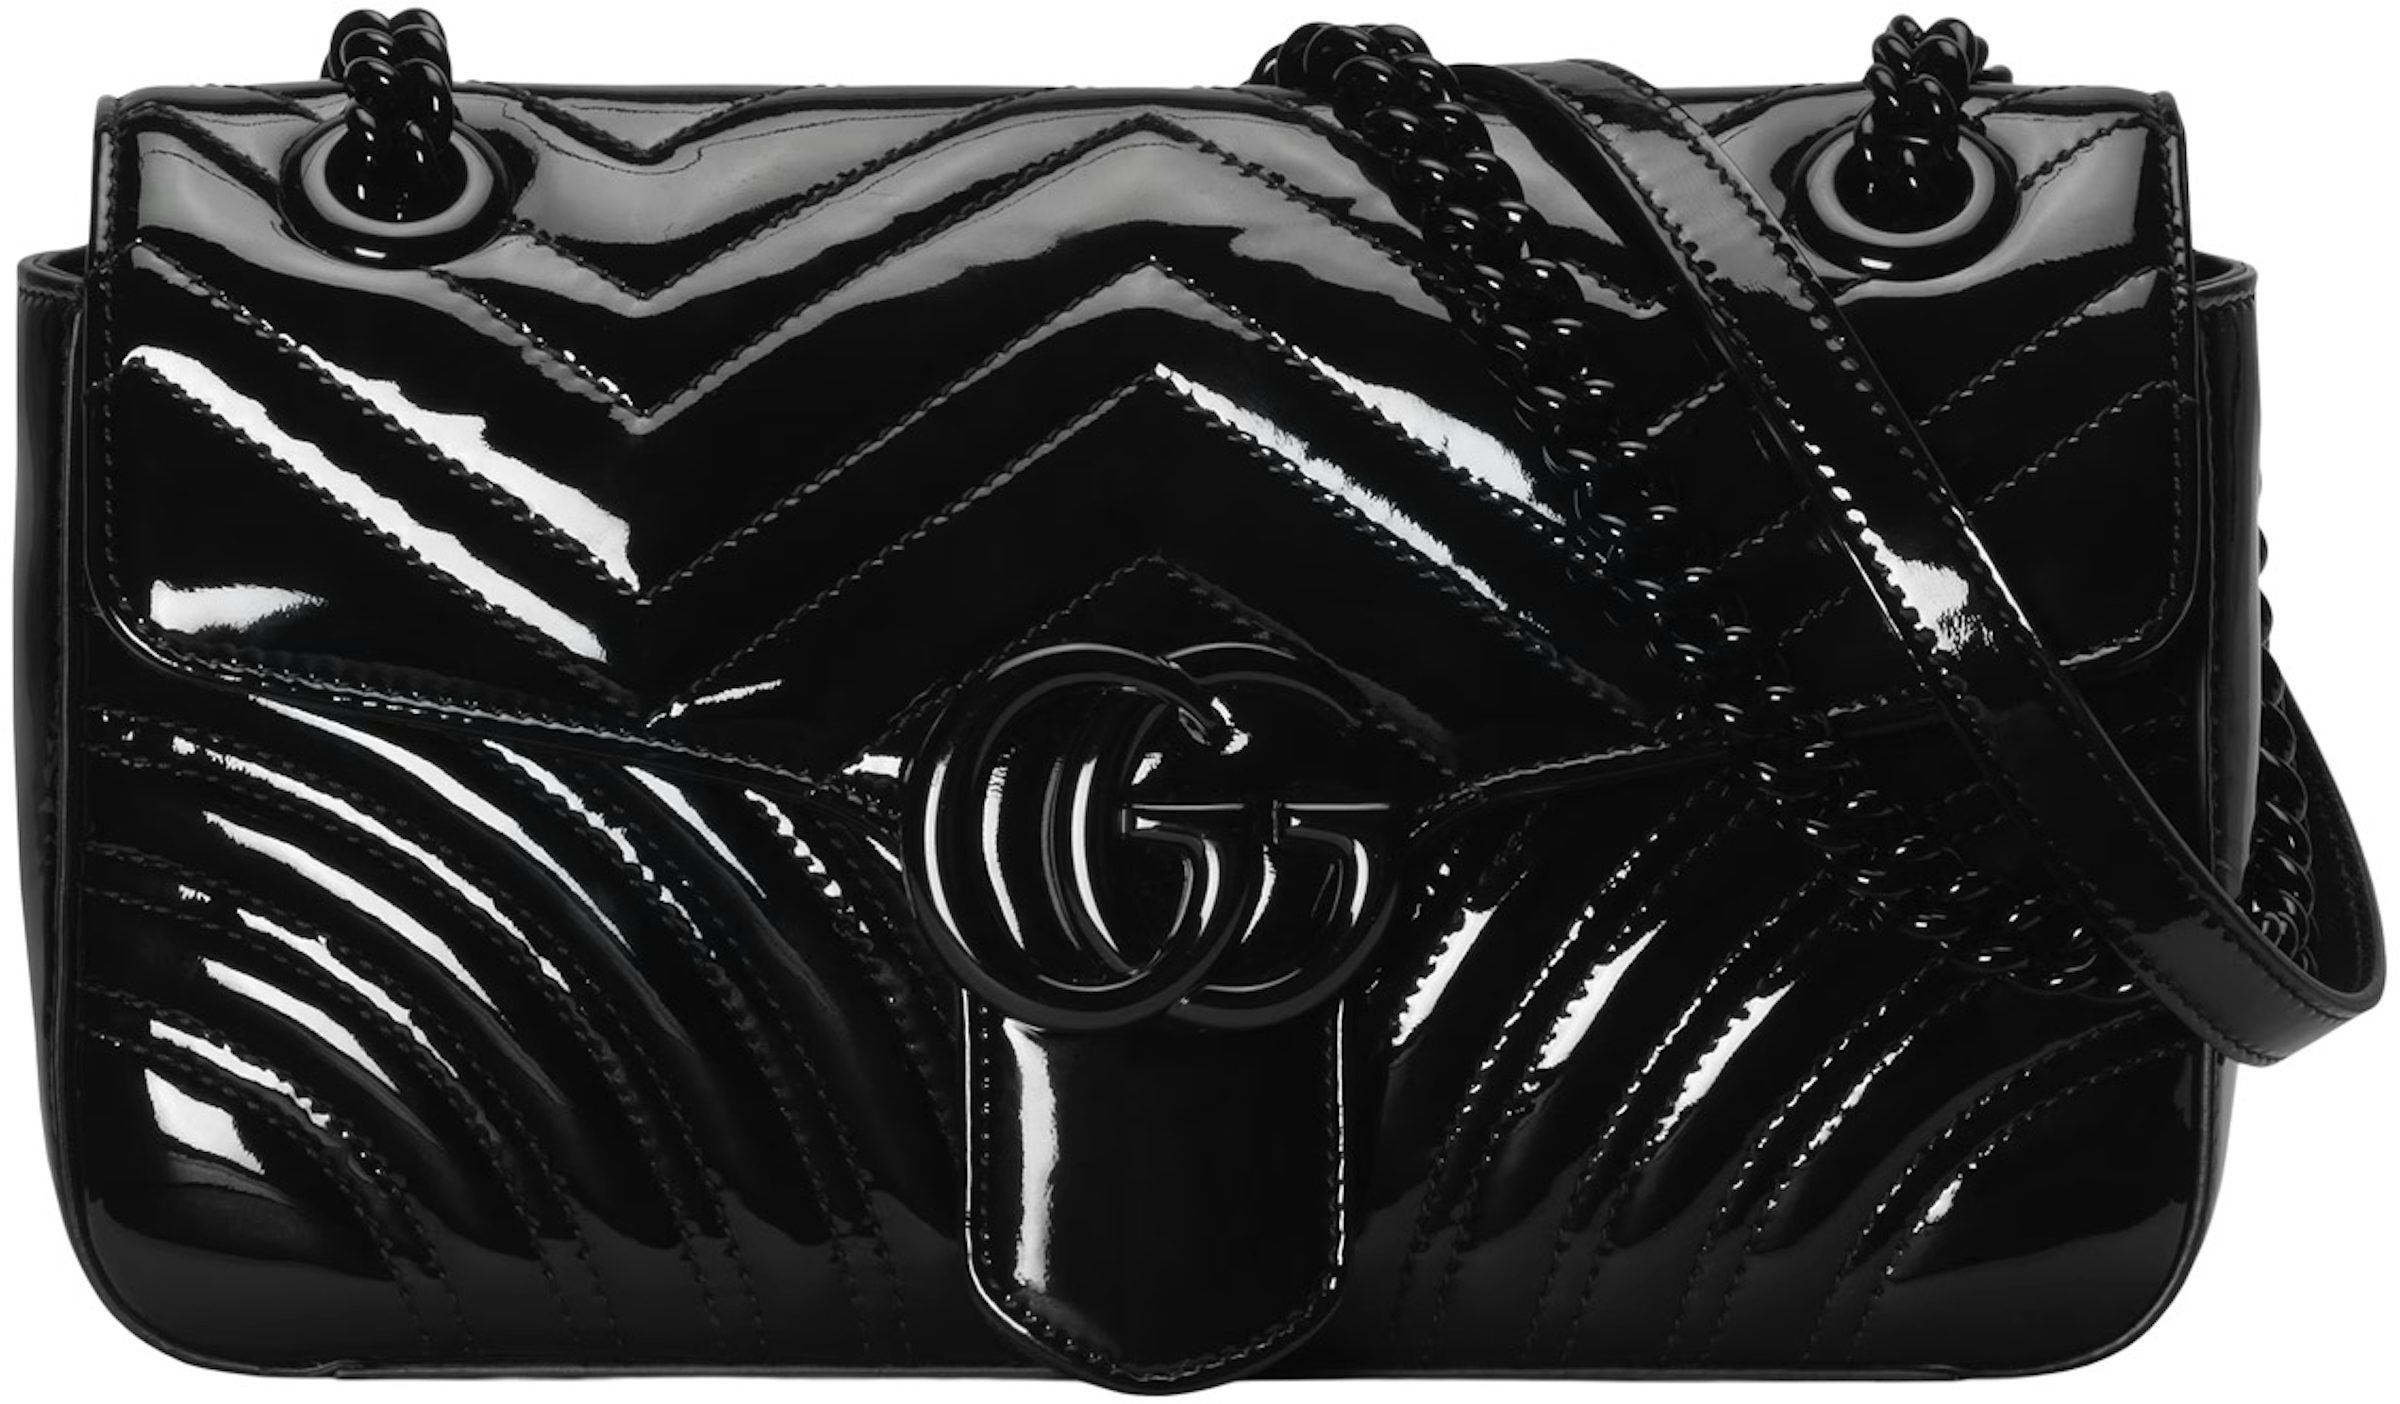 GG Marmont patent mini shoulder bag in black patent leather